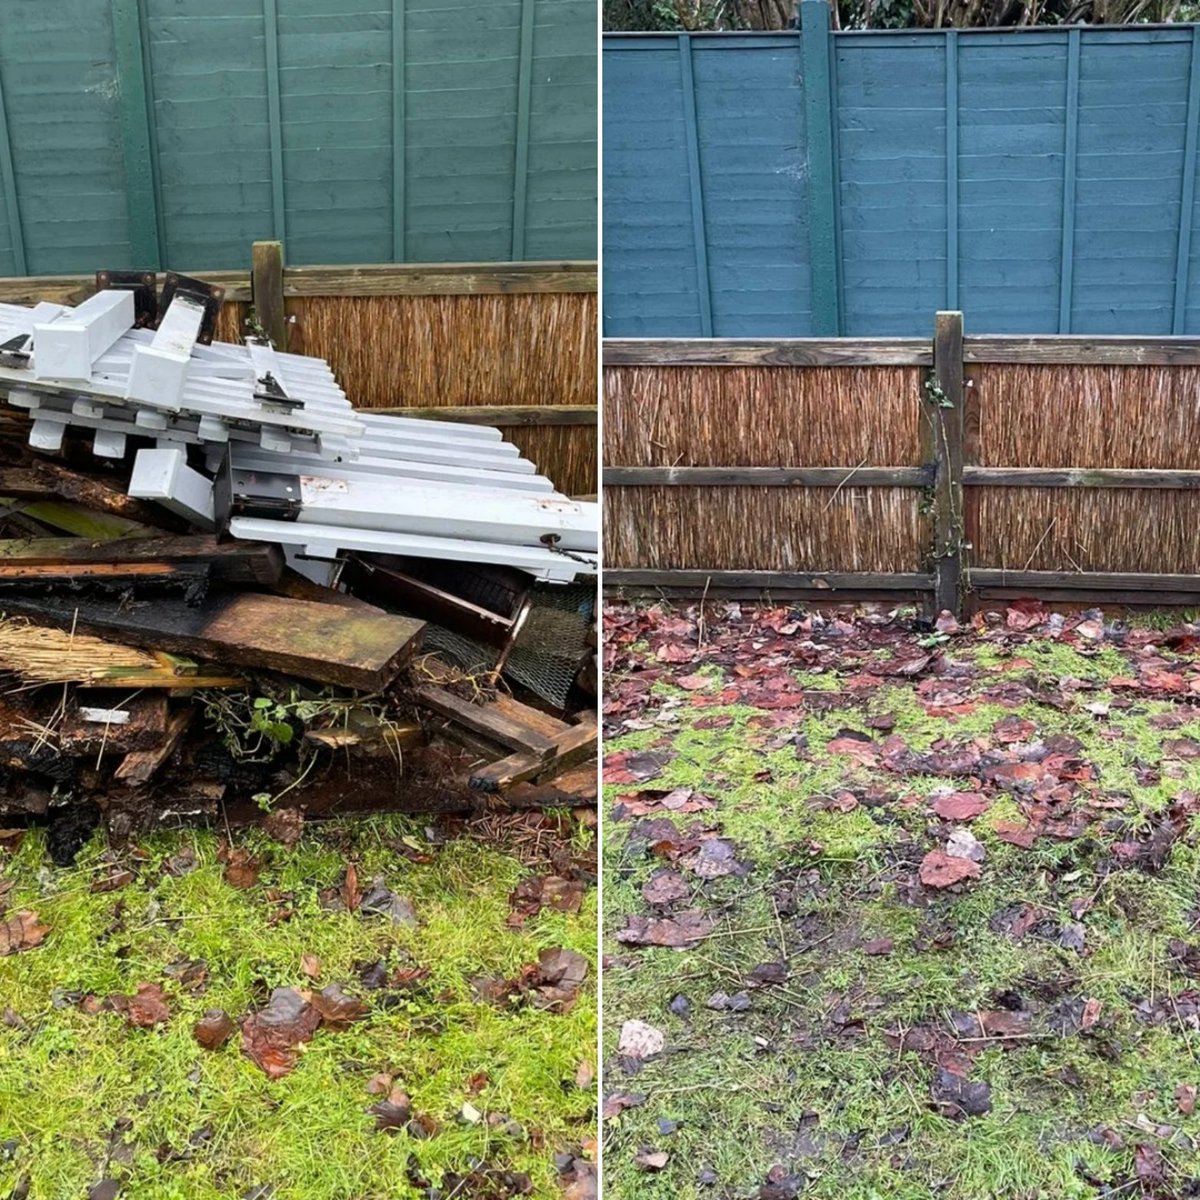 Spring is in the air, and that means it's time to get your garden spick and span!🏡 

 #springcleaning #rubbishremoval #gardentidyup #outdoorspace #neatandtidy #rubbishremovalforspring #tidyupyourgarden #seasonalcleaning #rubbishremoval #rubbishclearance #junkremoval #norfolk